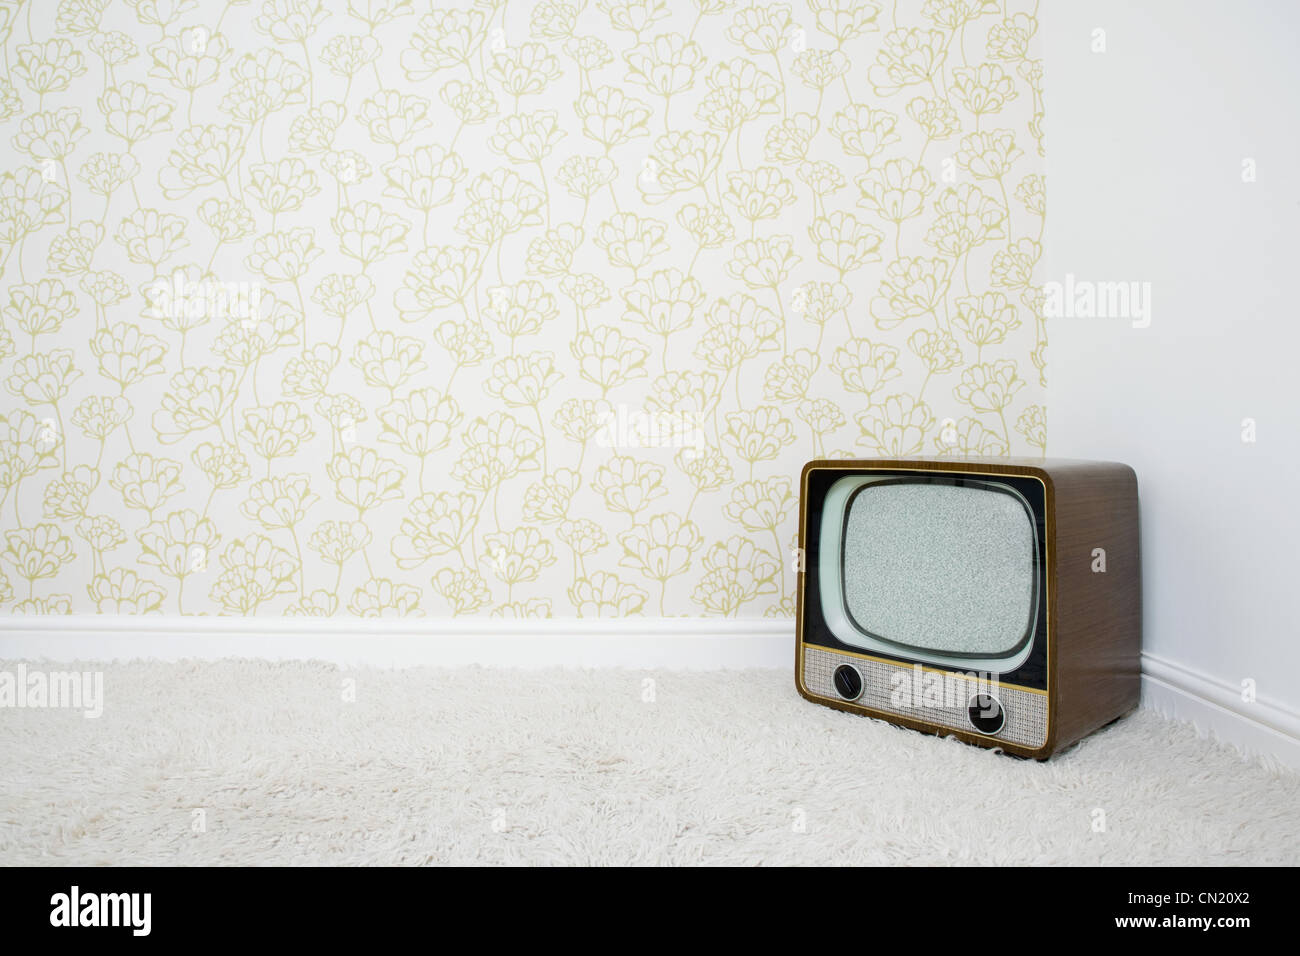 Retro television in corner of room with patterned wallpaper Stock Photo